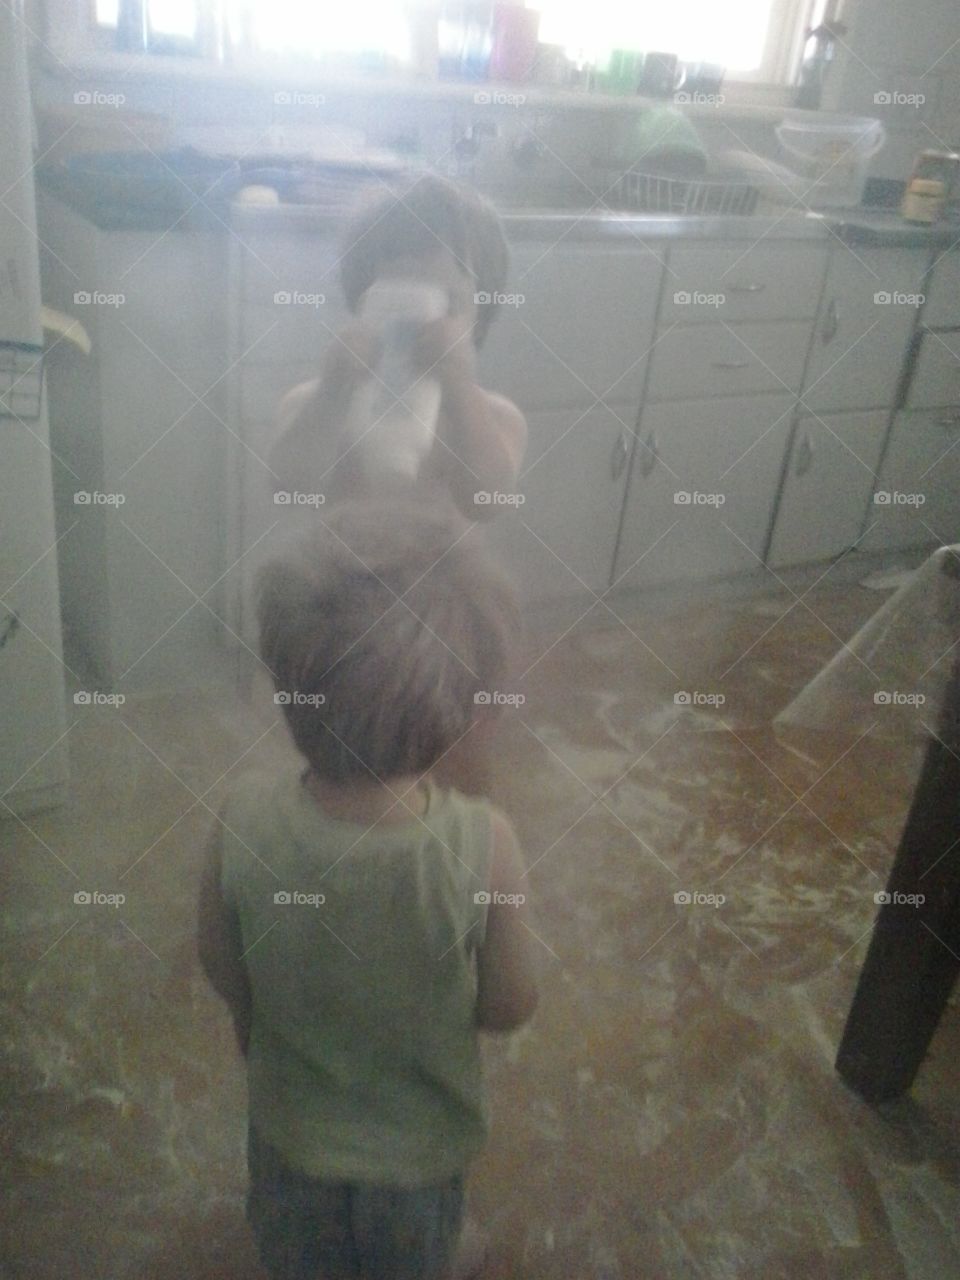 powder fight. i love ot when they make a mess like this. time to clean